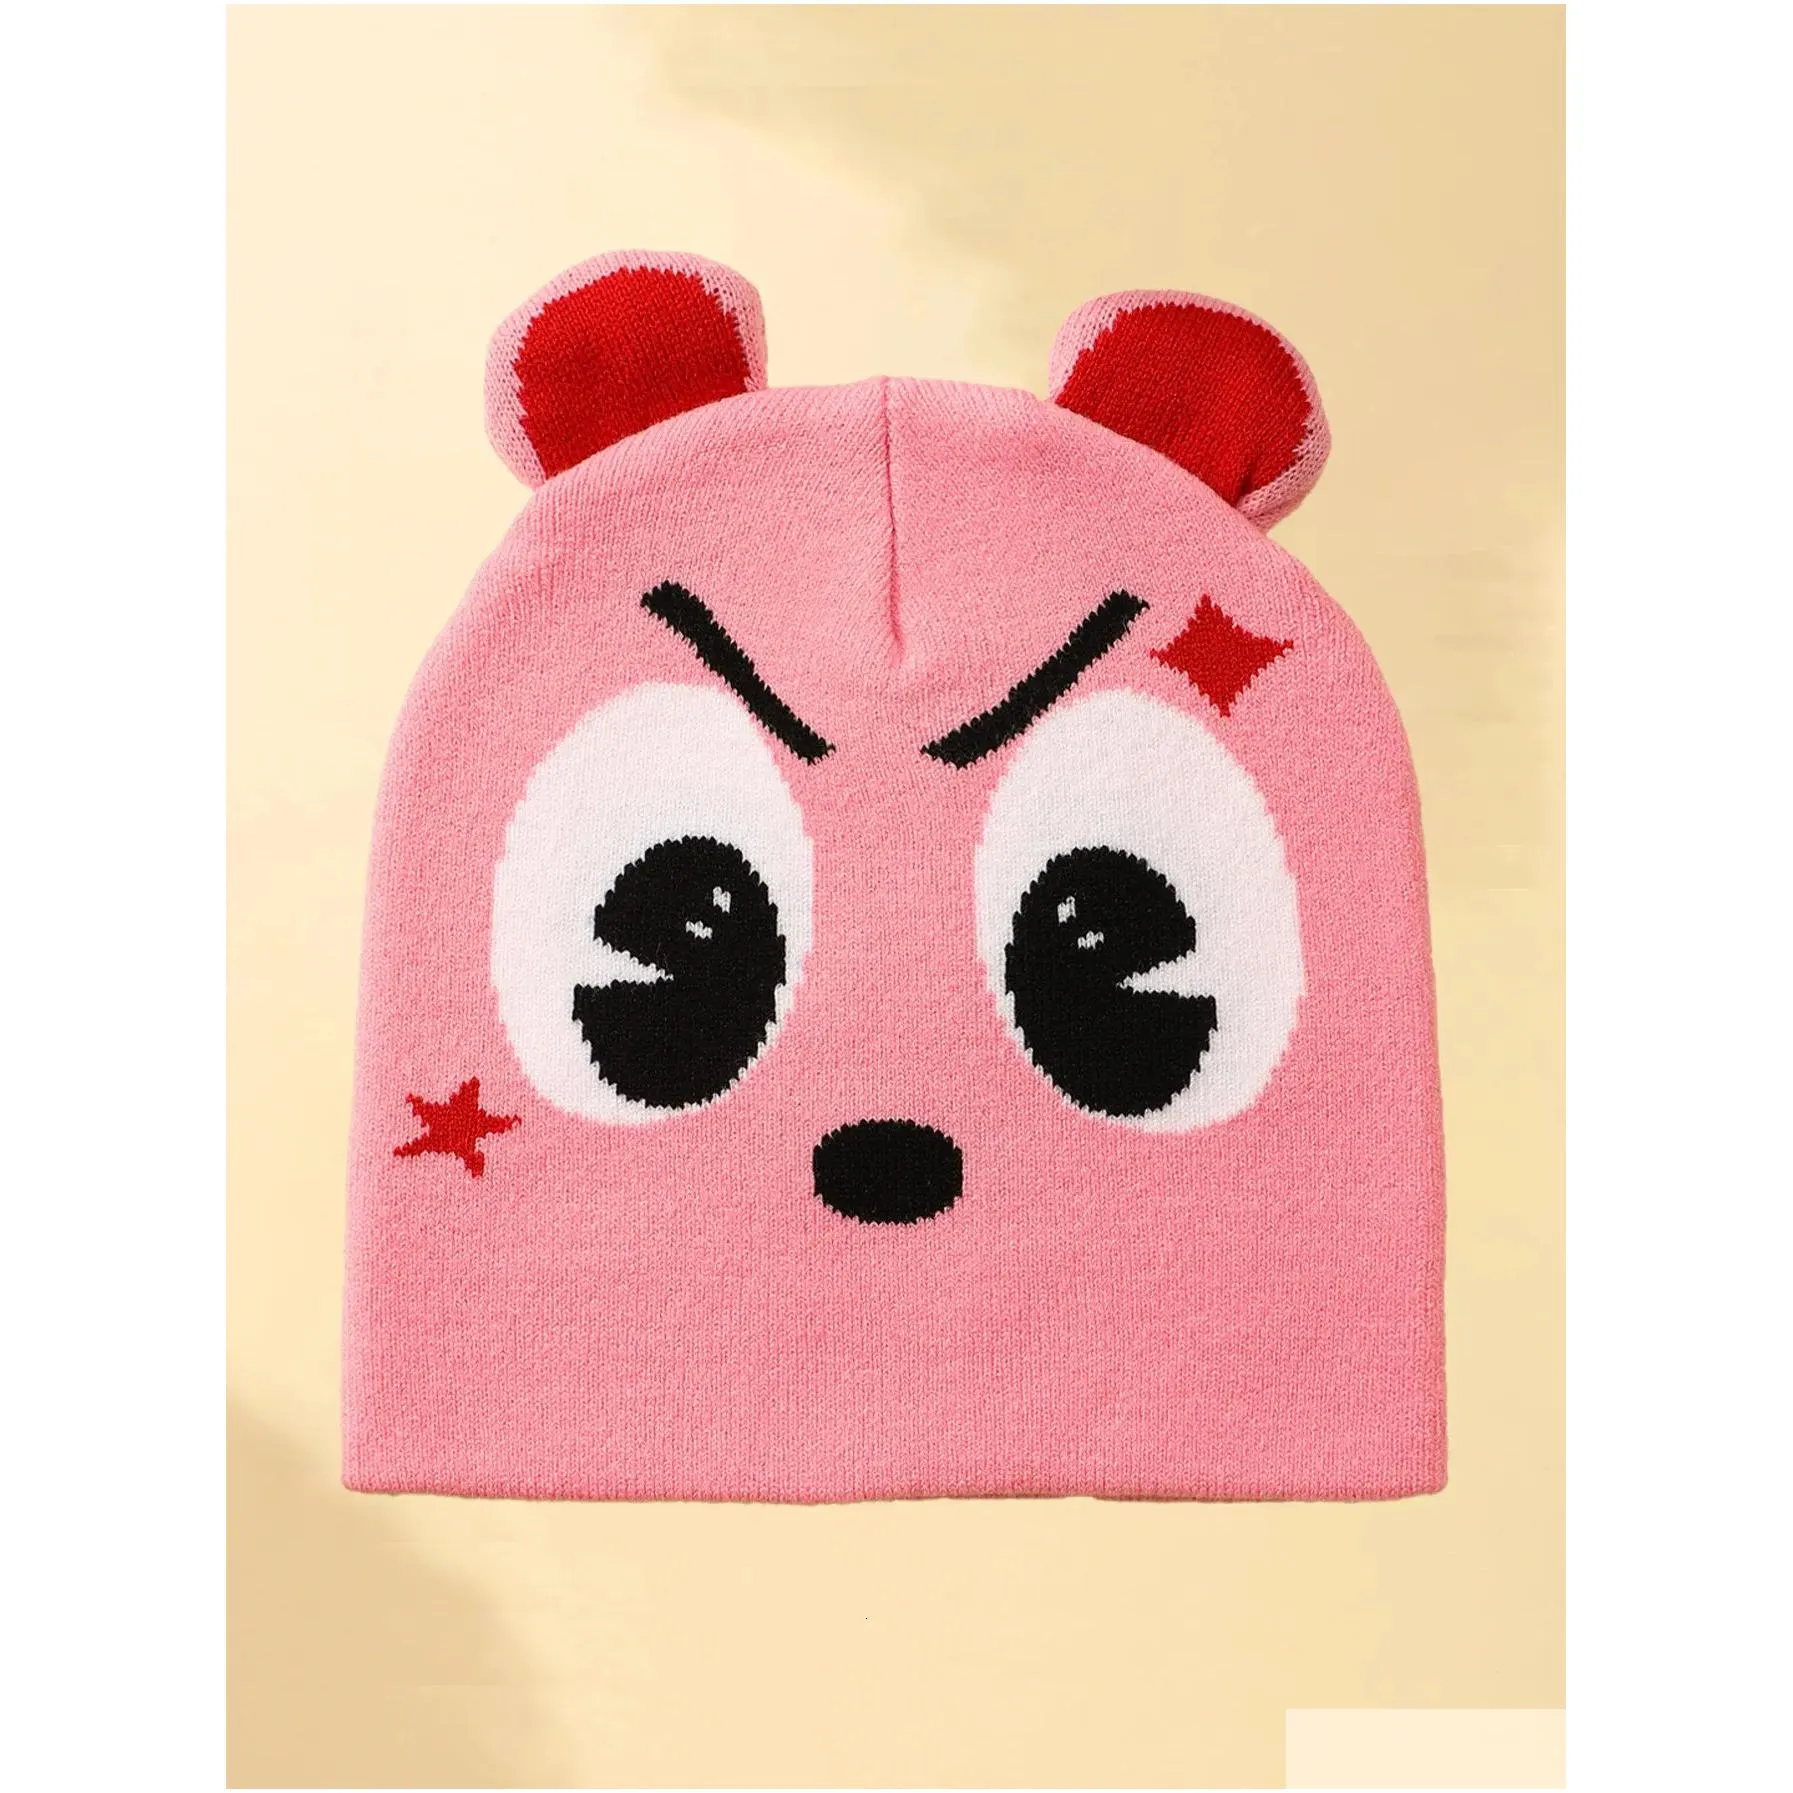 unisex kawaii cute fashion hat winter knitted hats party pink funny beanie cap for women men design hip-hop personality cold y2k